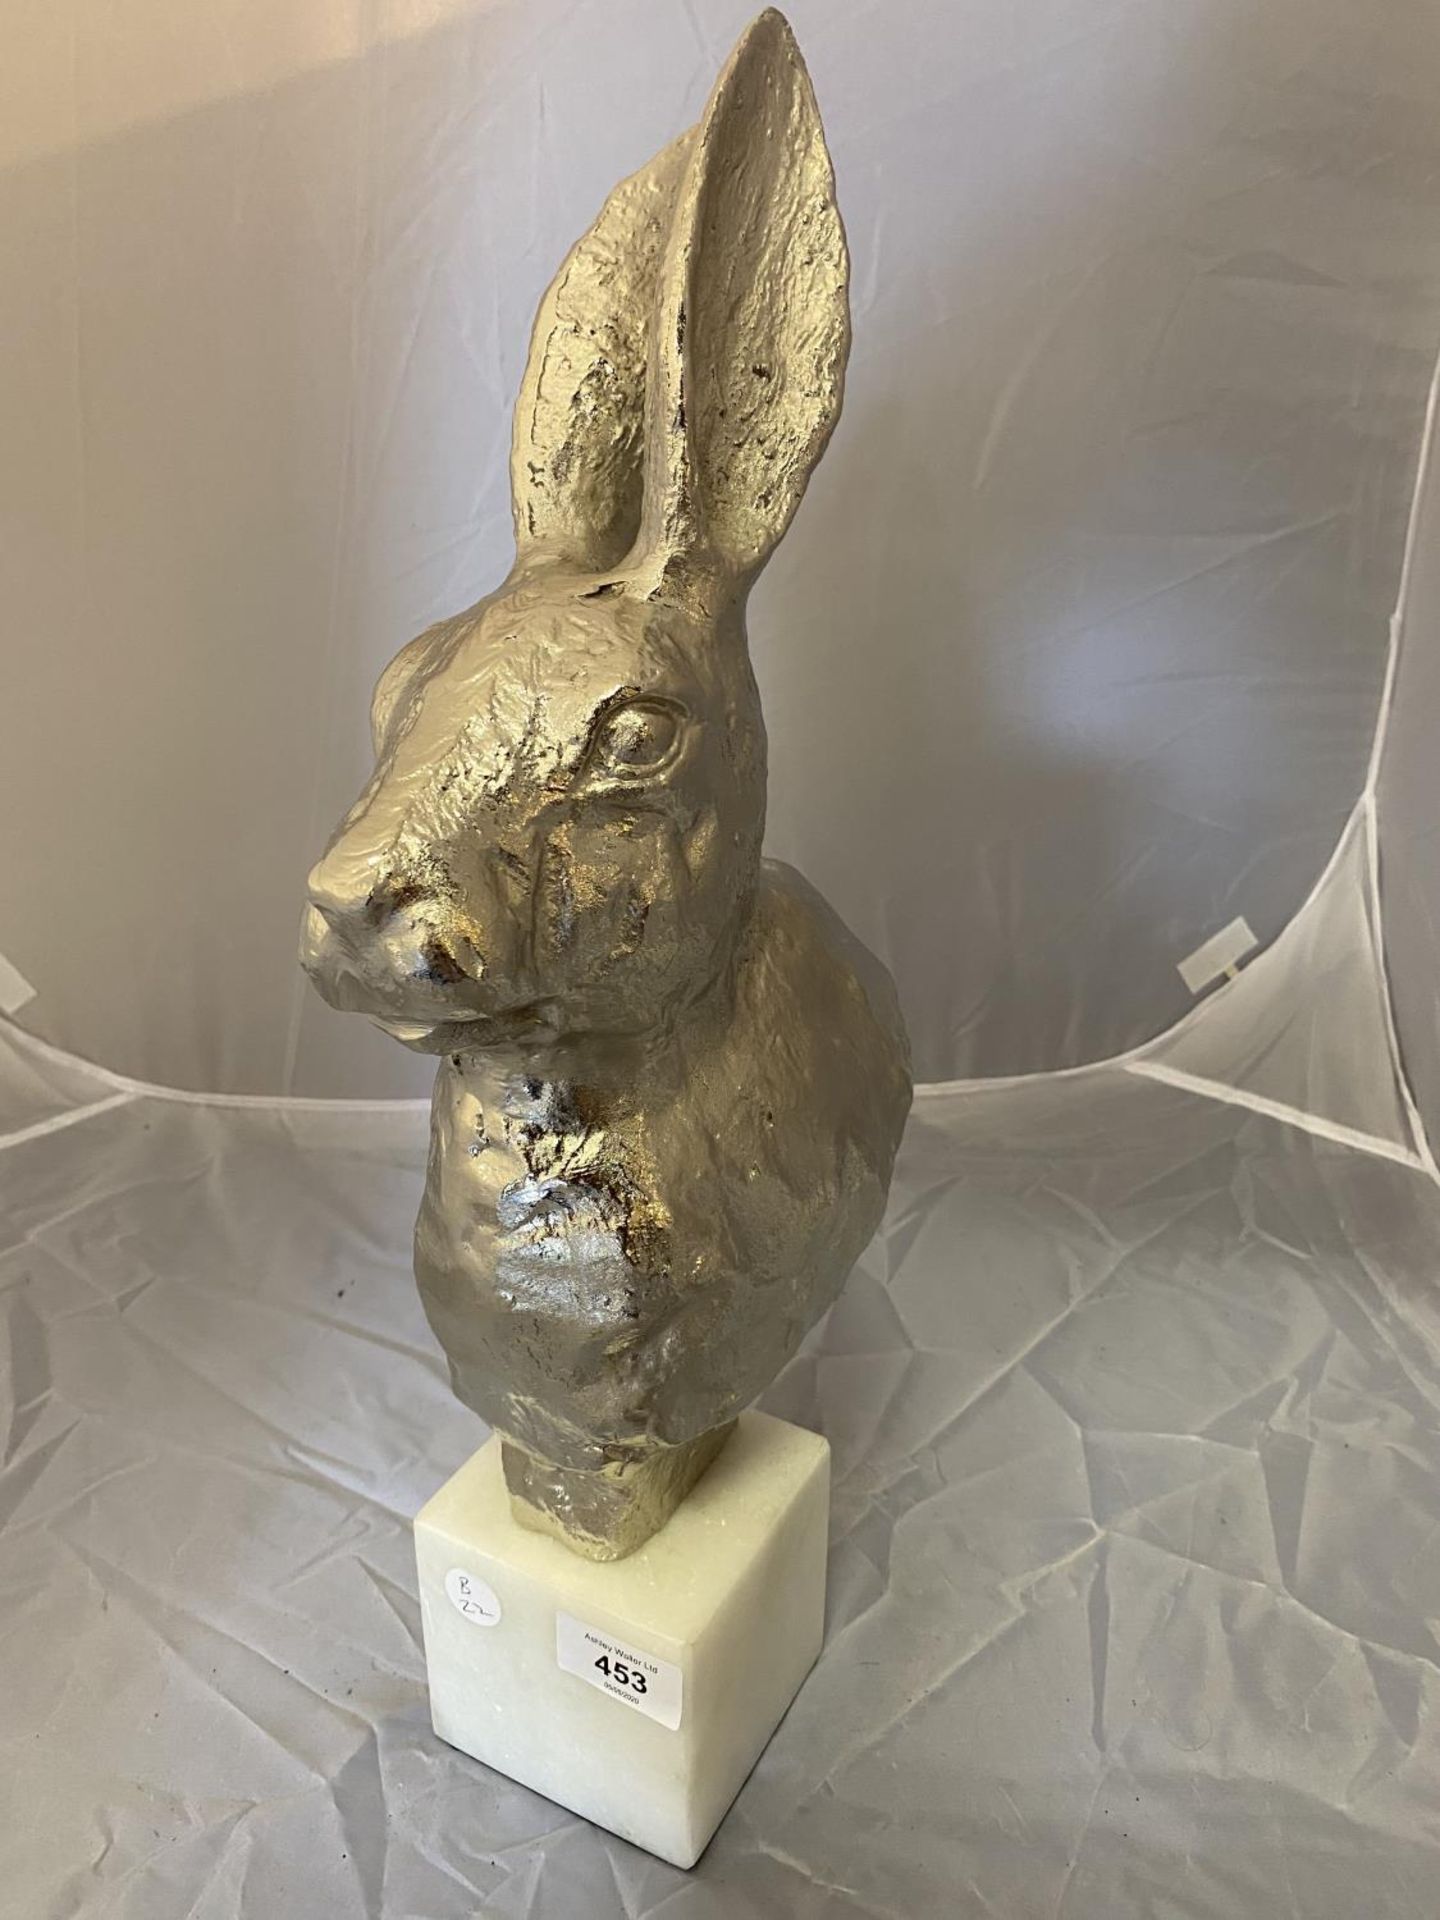 A CHROME RABBITS BUST ON A BASE - Image 2 of 2